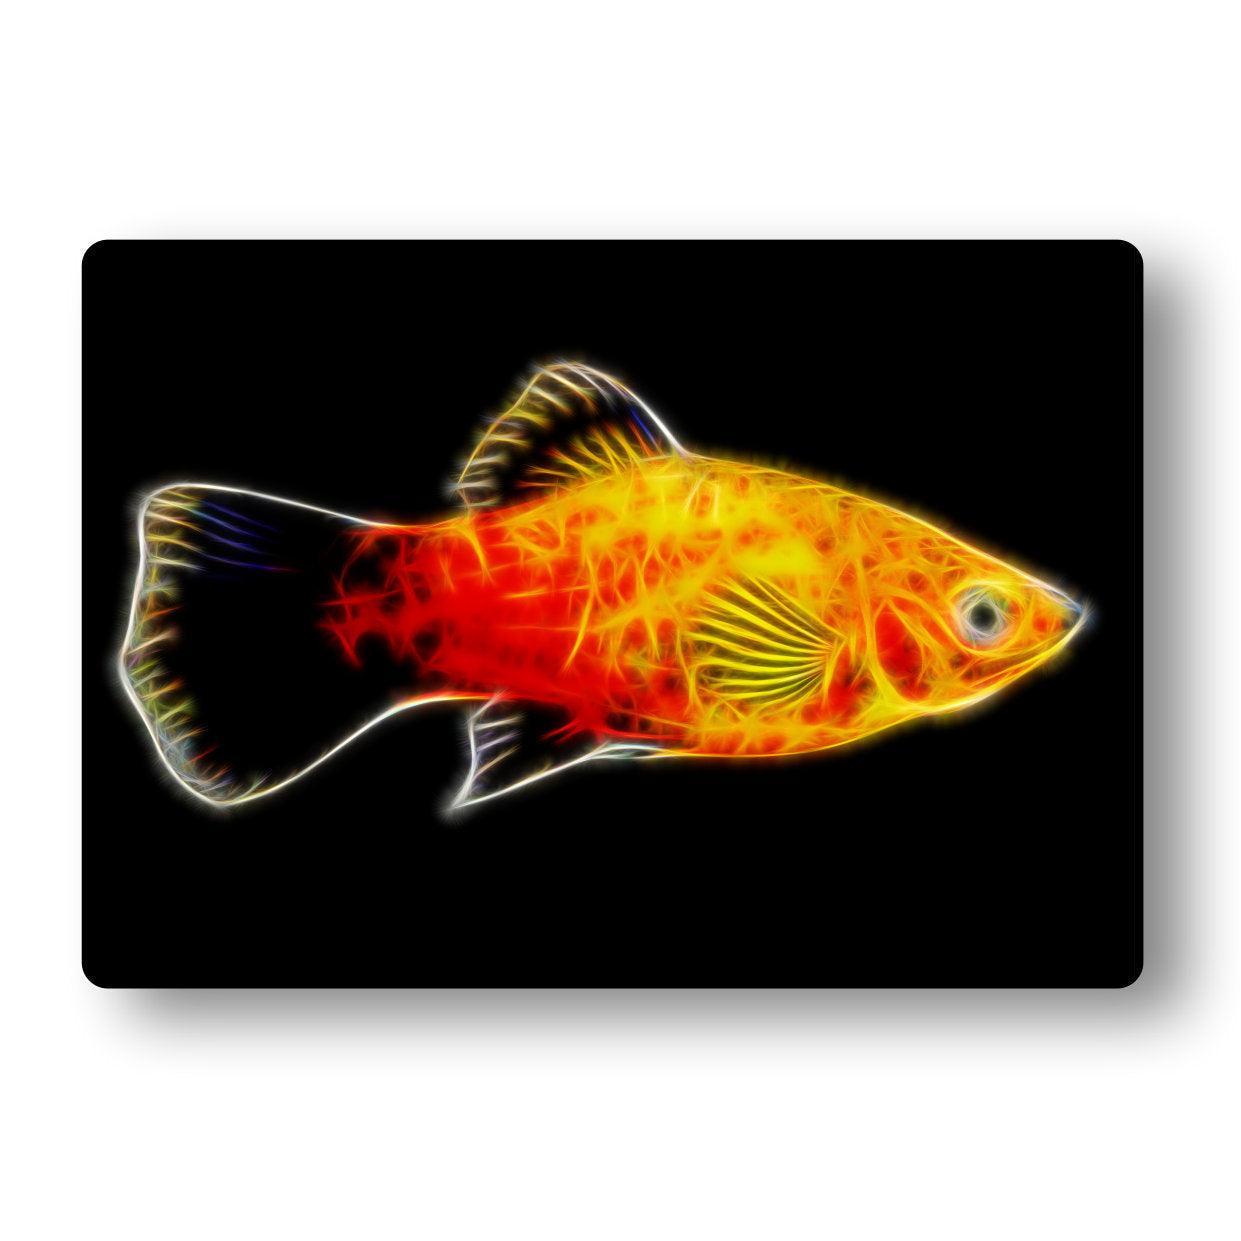 Sunburst Platy Fish Metal Wall Plaque with Stunning Fractal Art Design. Also available as Mouse Pad, Keychain or Coaster.